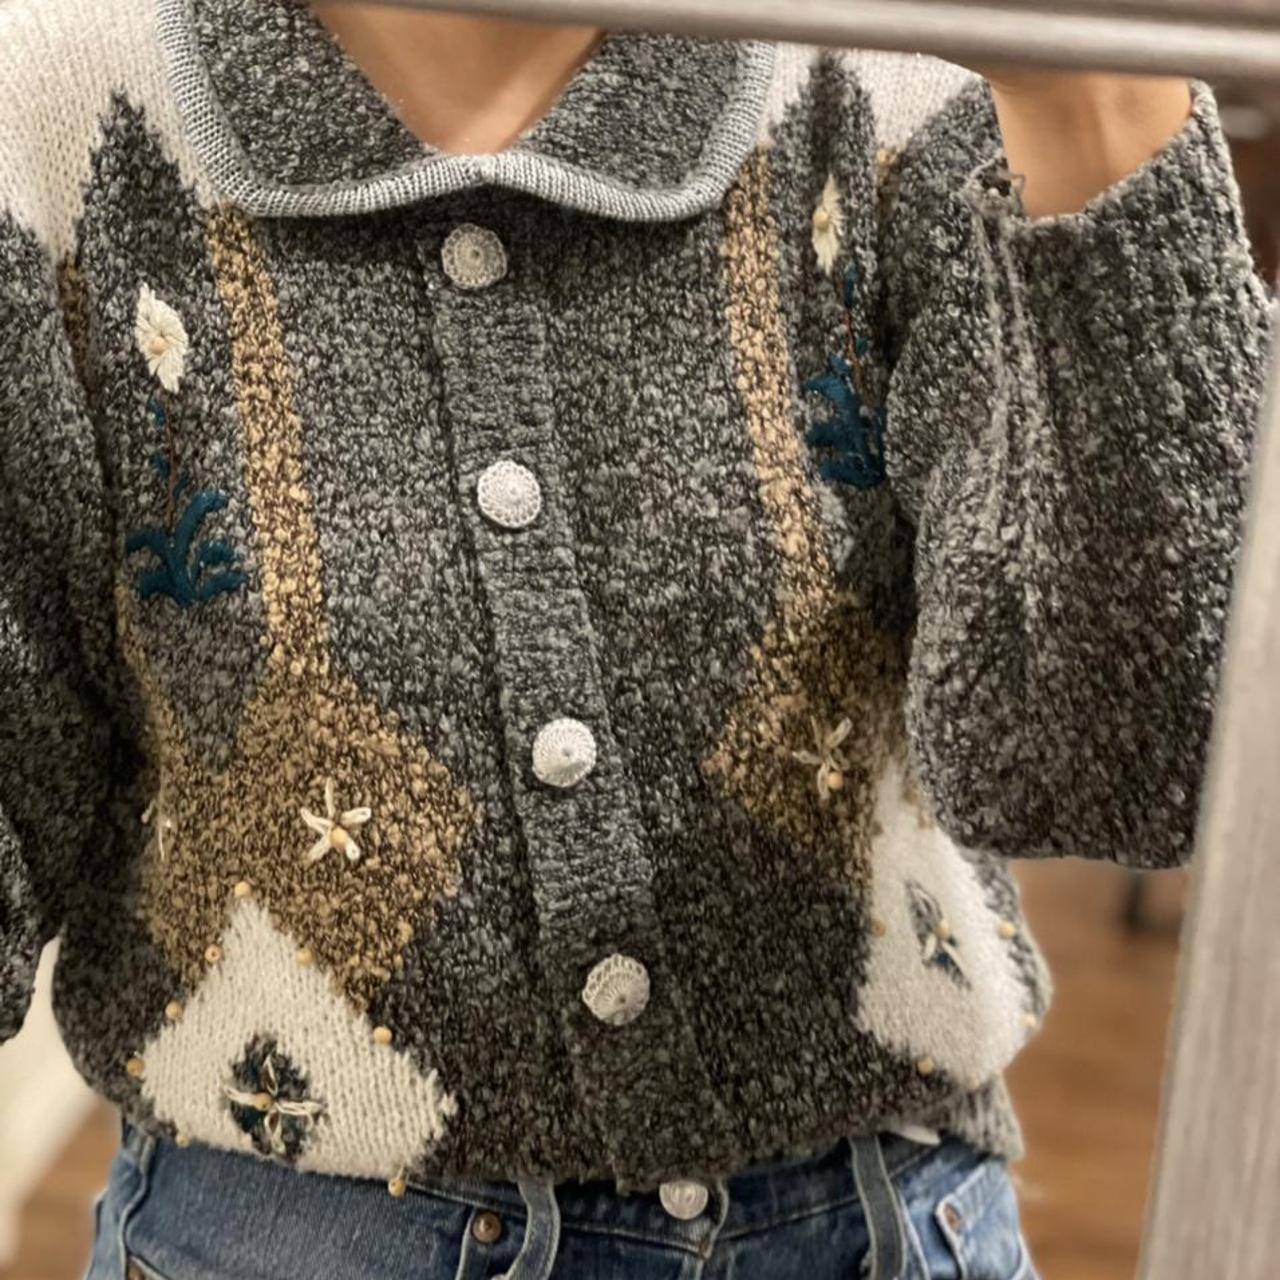 Product Image 2 - Vintage cardigan ❄️

Embroiders details 
no